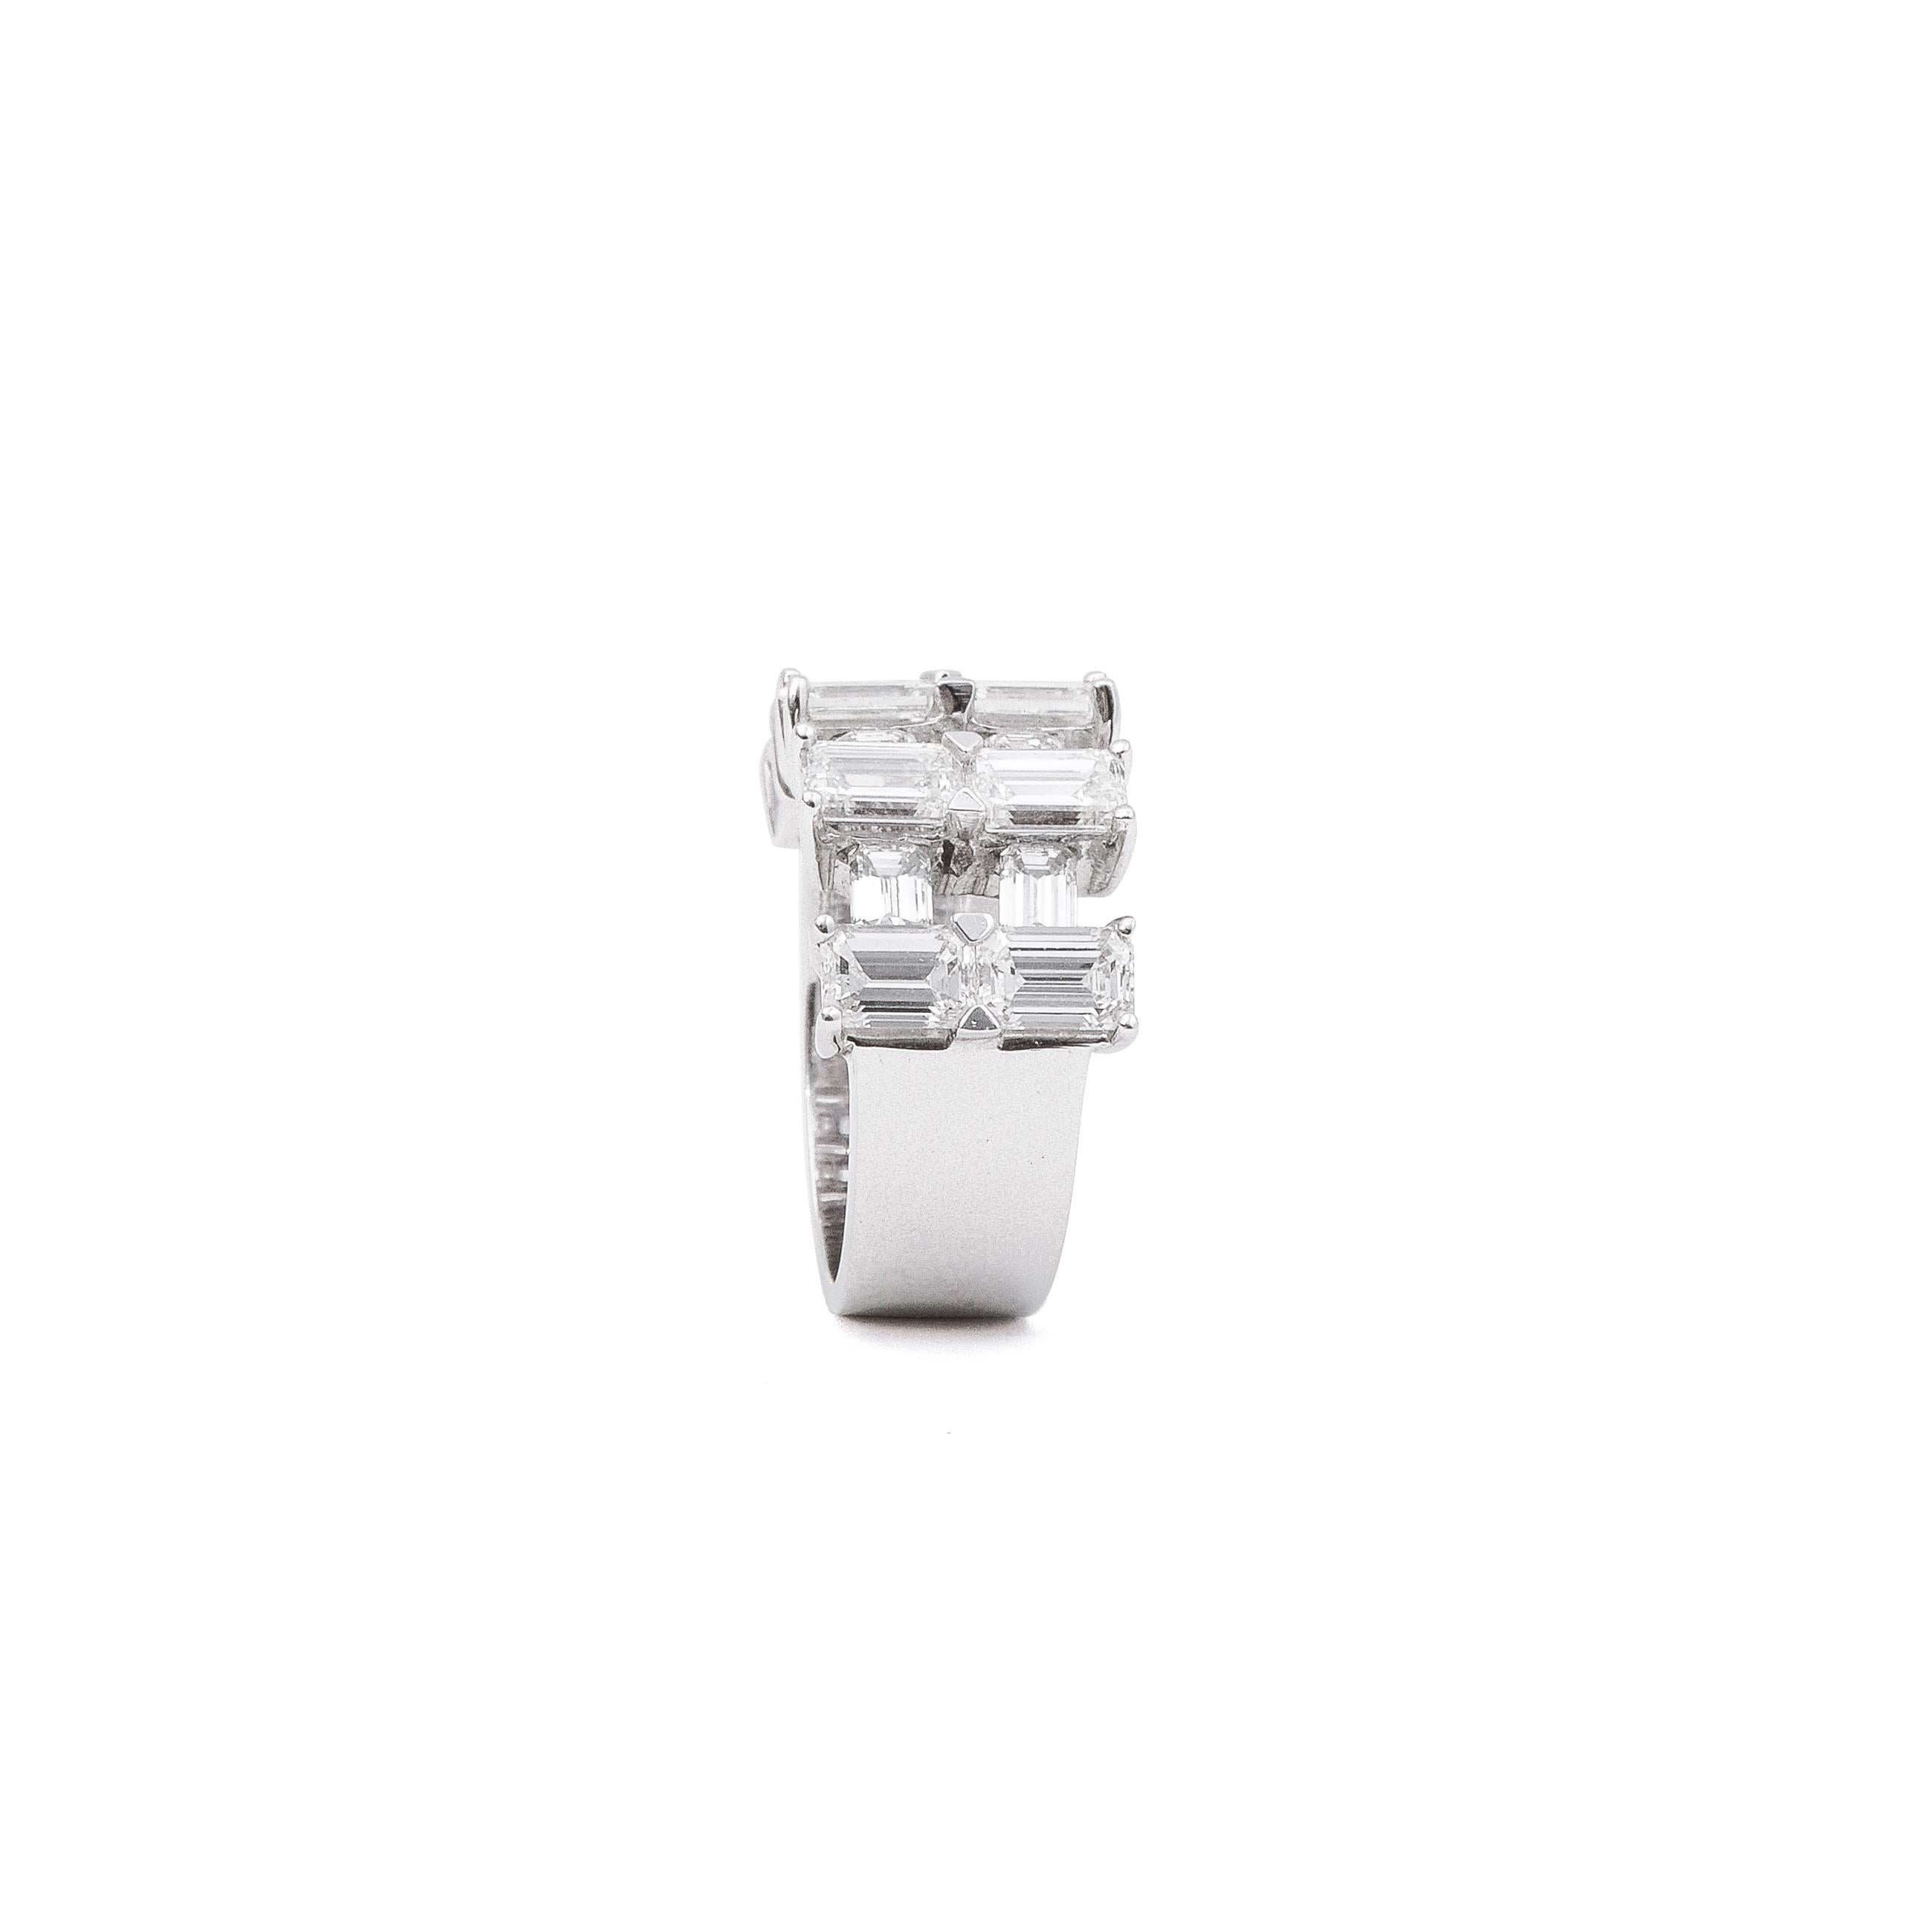 18 Karat White Gold Diamond Cocktail Ring

Beautifully crafted 18 Karat white gold ring studded with emerald cut diamonds set together to give the illusion of a weave.  Perfect for cocktails and evening wear.

Ring Size - US size 6.75
Diamonds -